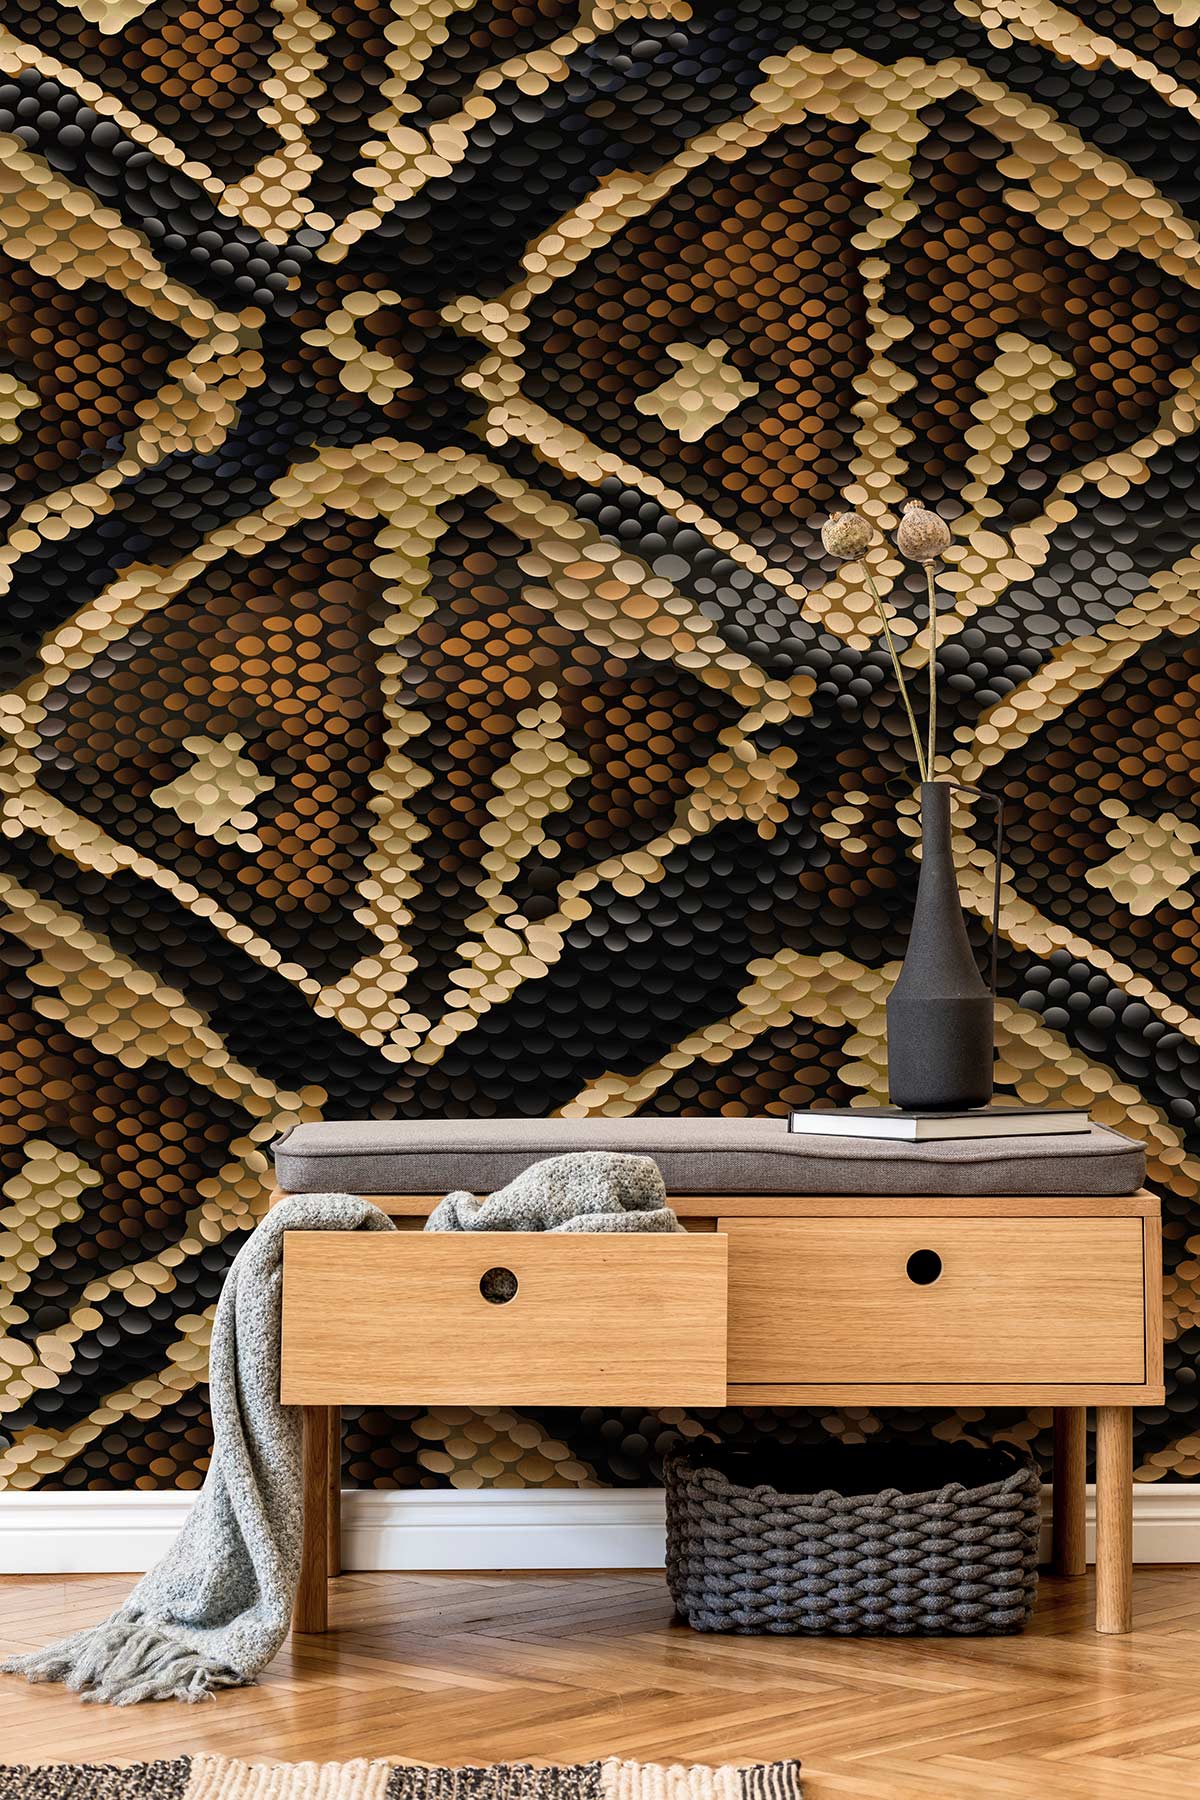 python art animal skin wallpaper mural for use as a decorative element in hallways